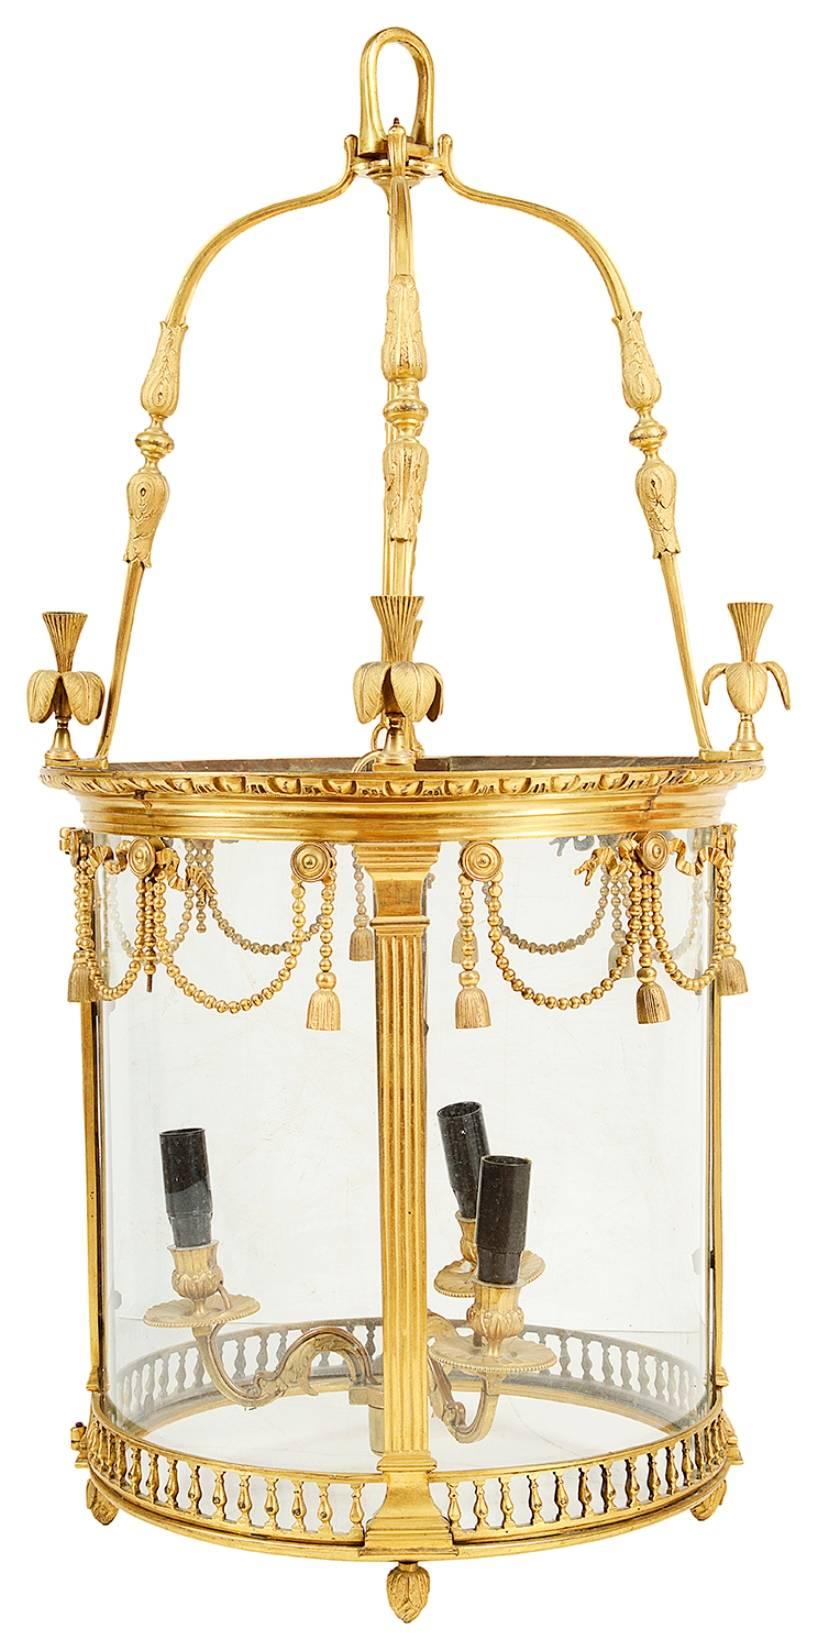 A good quality French, late 19th century brass hall lantern, having swag and tassel decoration, fluted columns and a gallery to the base. Bowed glass panels and a three branch sconce to the centre.